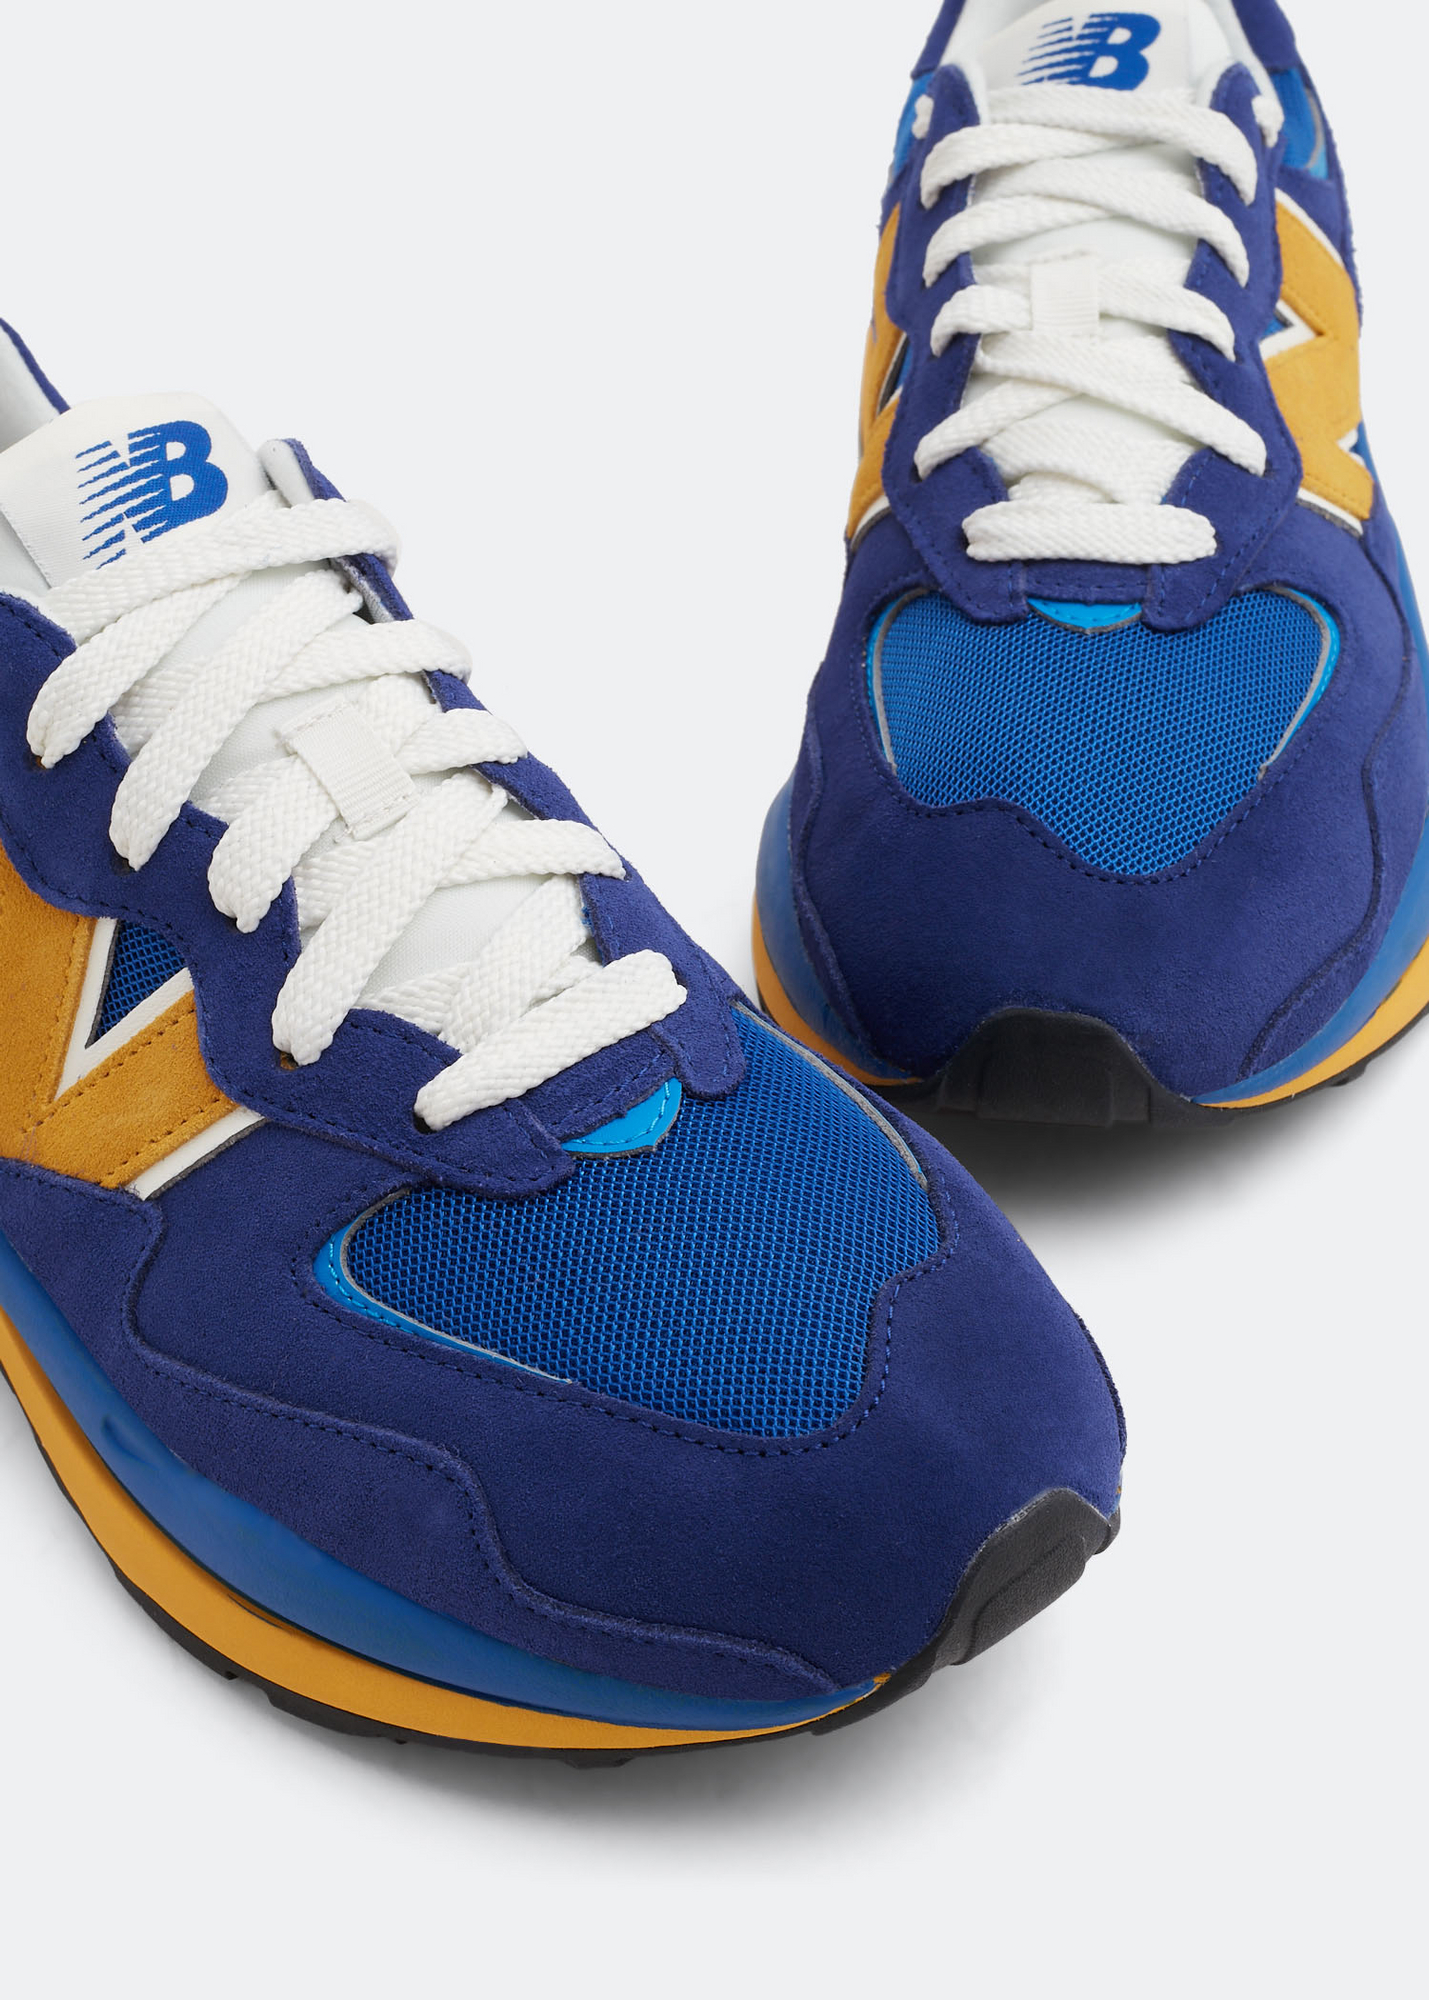 New Balance 5740 sneakers for Men - Blue in KSA | Level Shoes